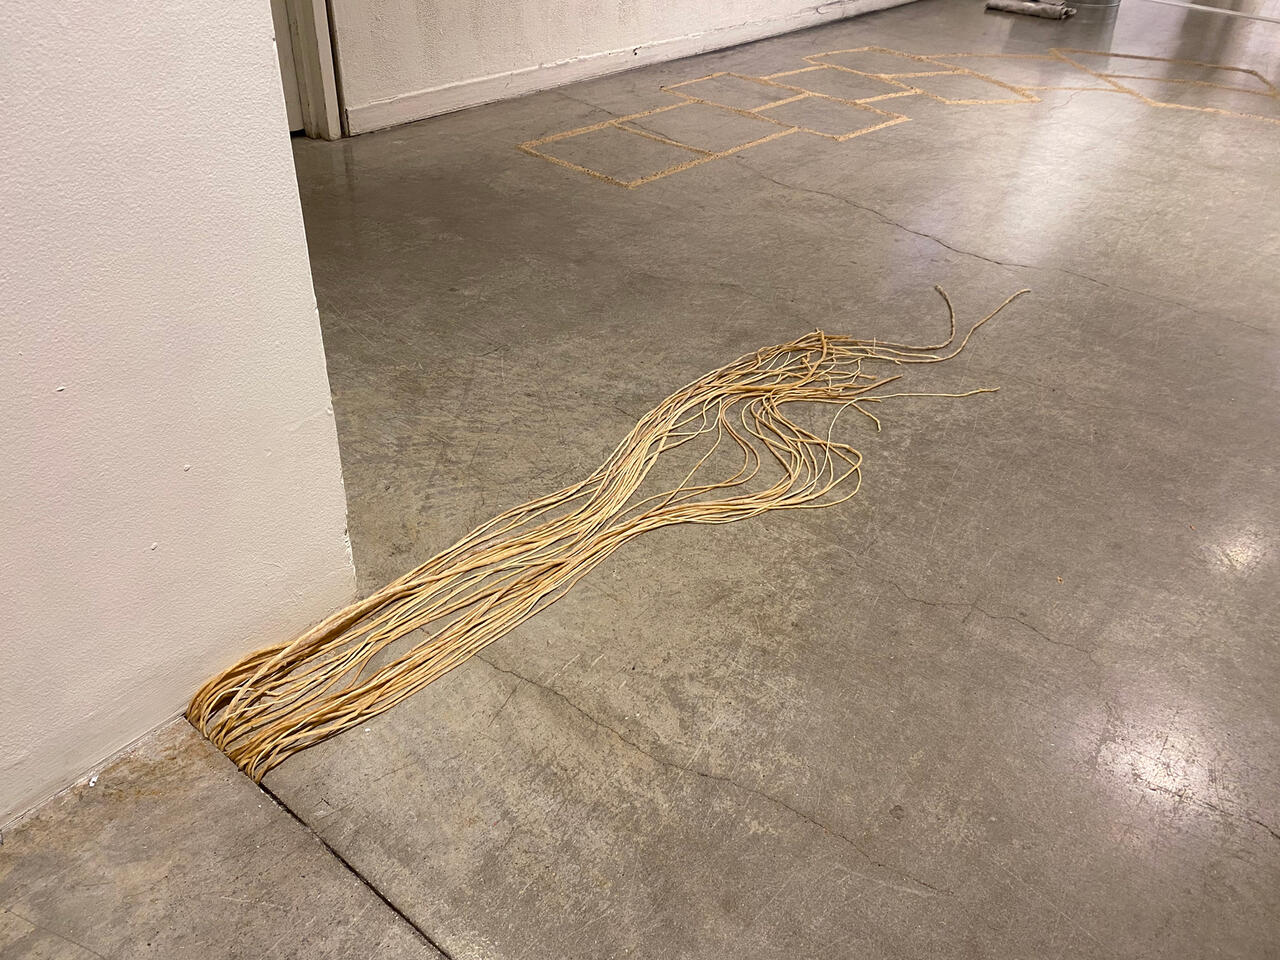 Installation with ropes